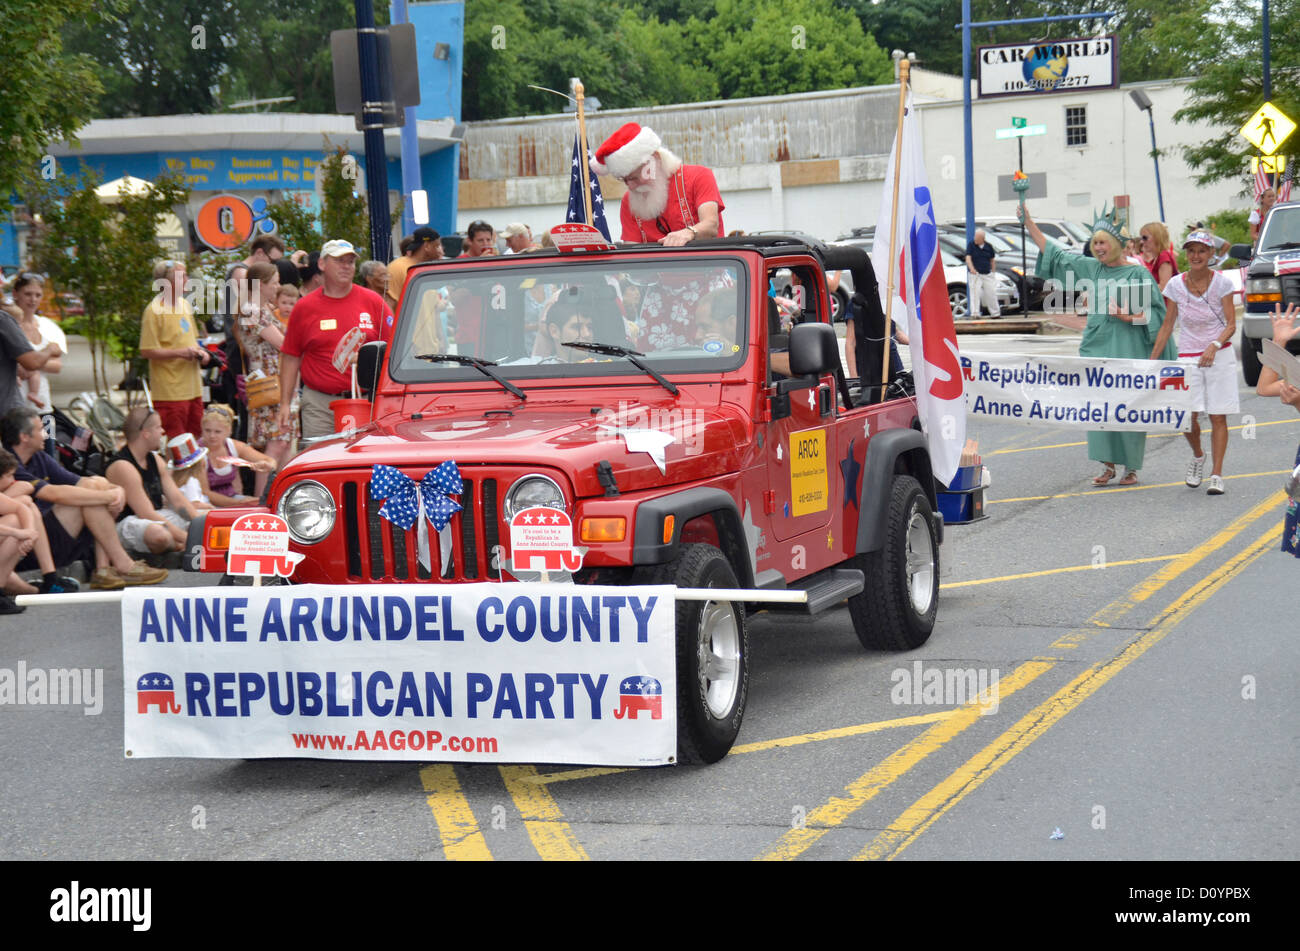 Anne Arundel Republican Party participate in the July 4th parade in Annapolis, Maryland Stock Photo